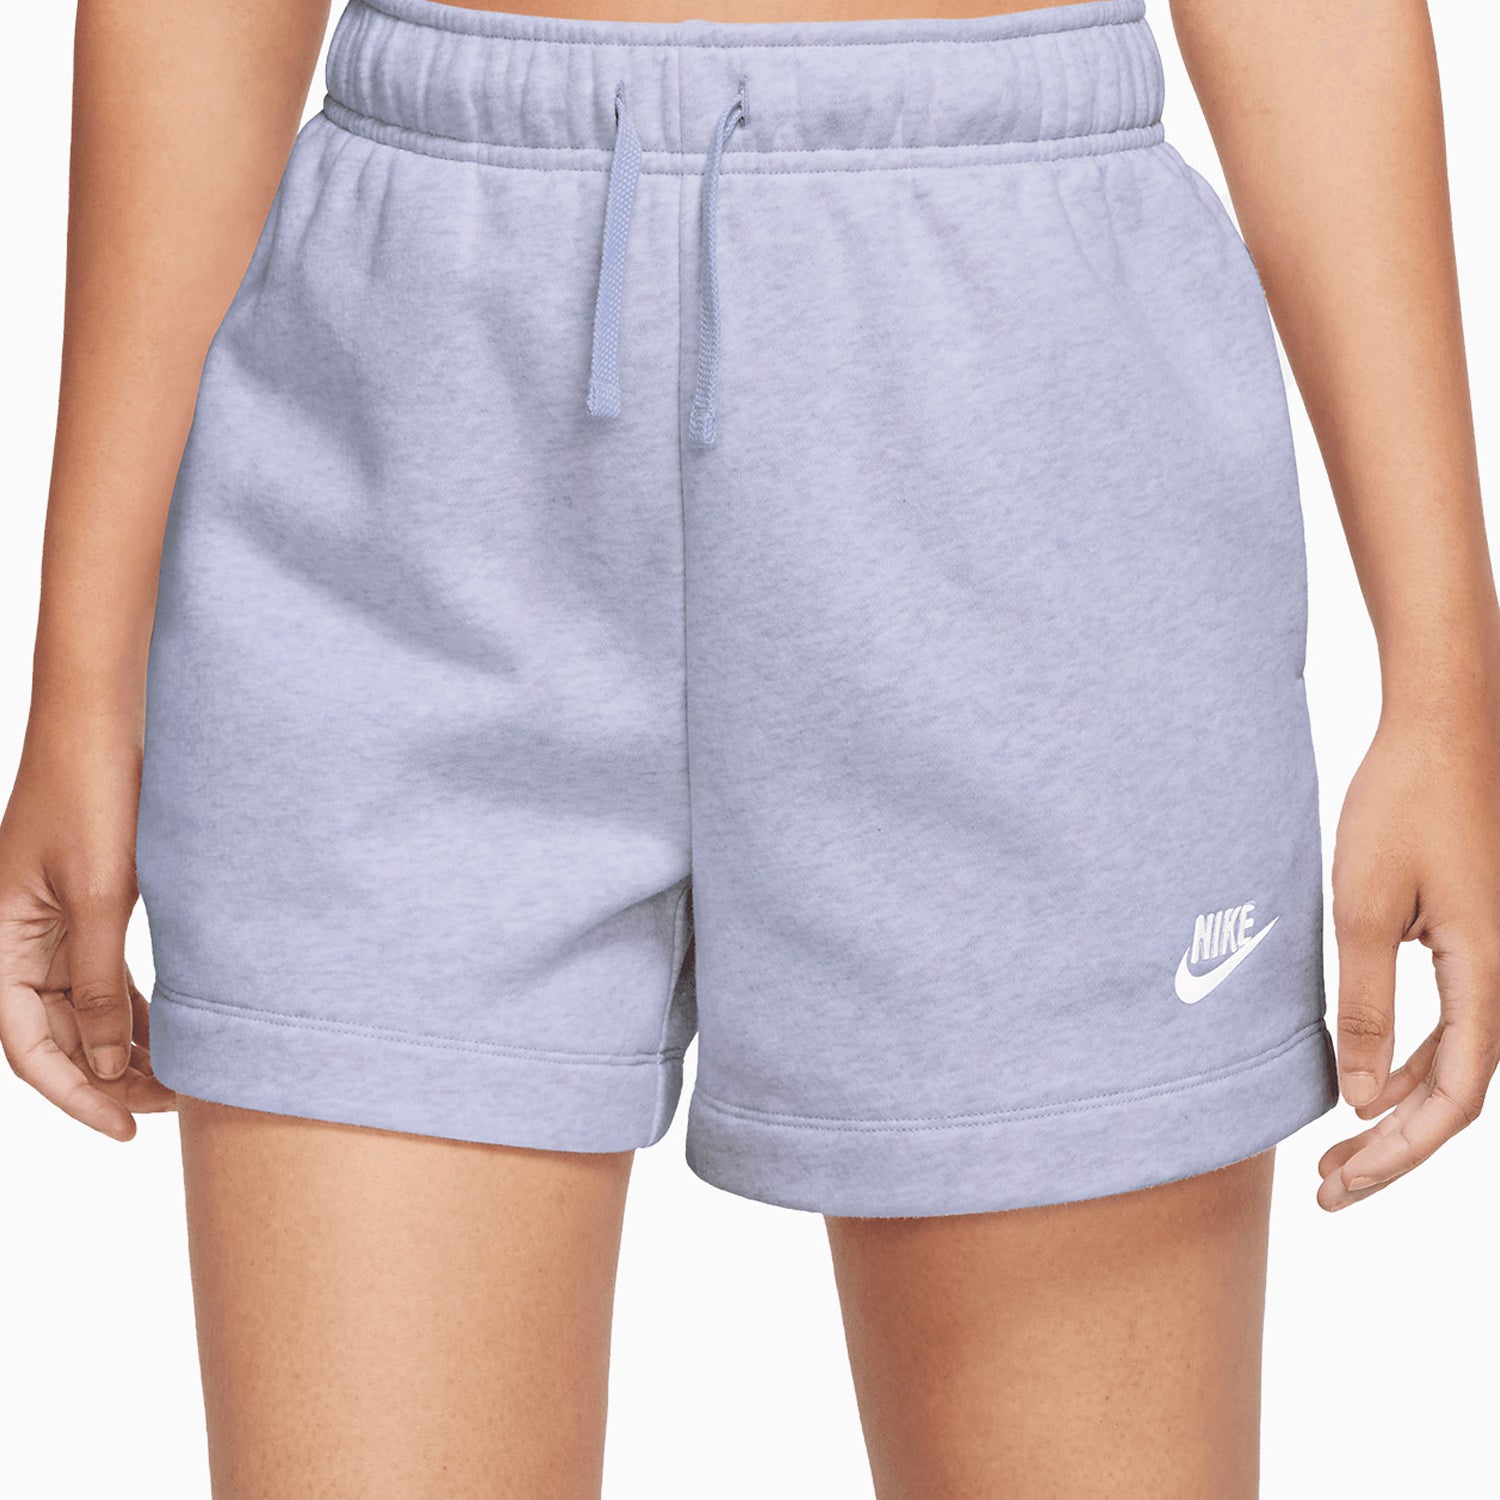 womens-nike-sportswear-club-essentials-t-shirt-and-shorts-outfit-dx7906-536-dq5802-536